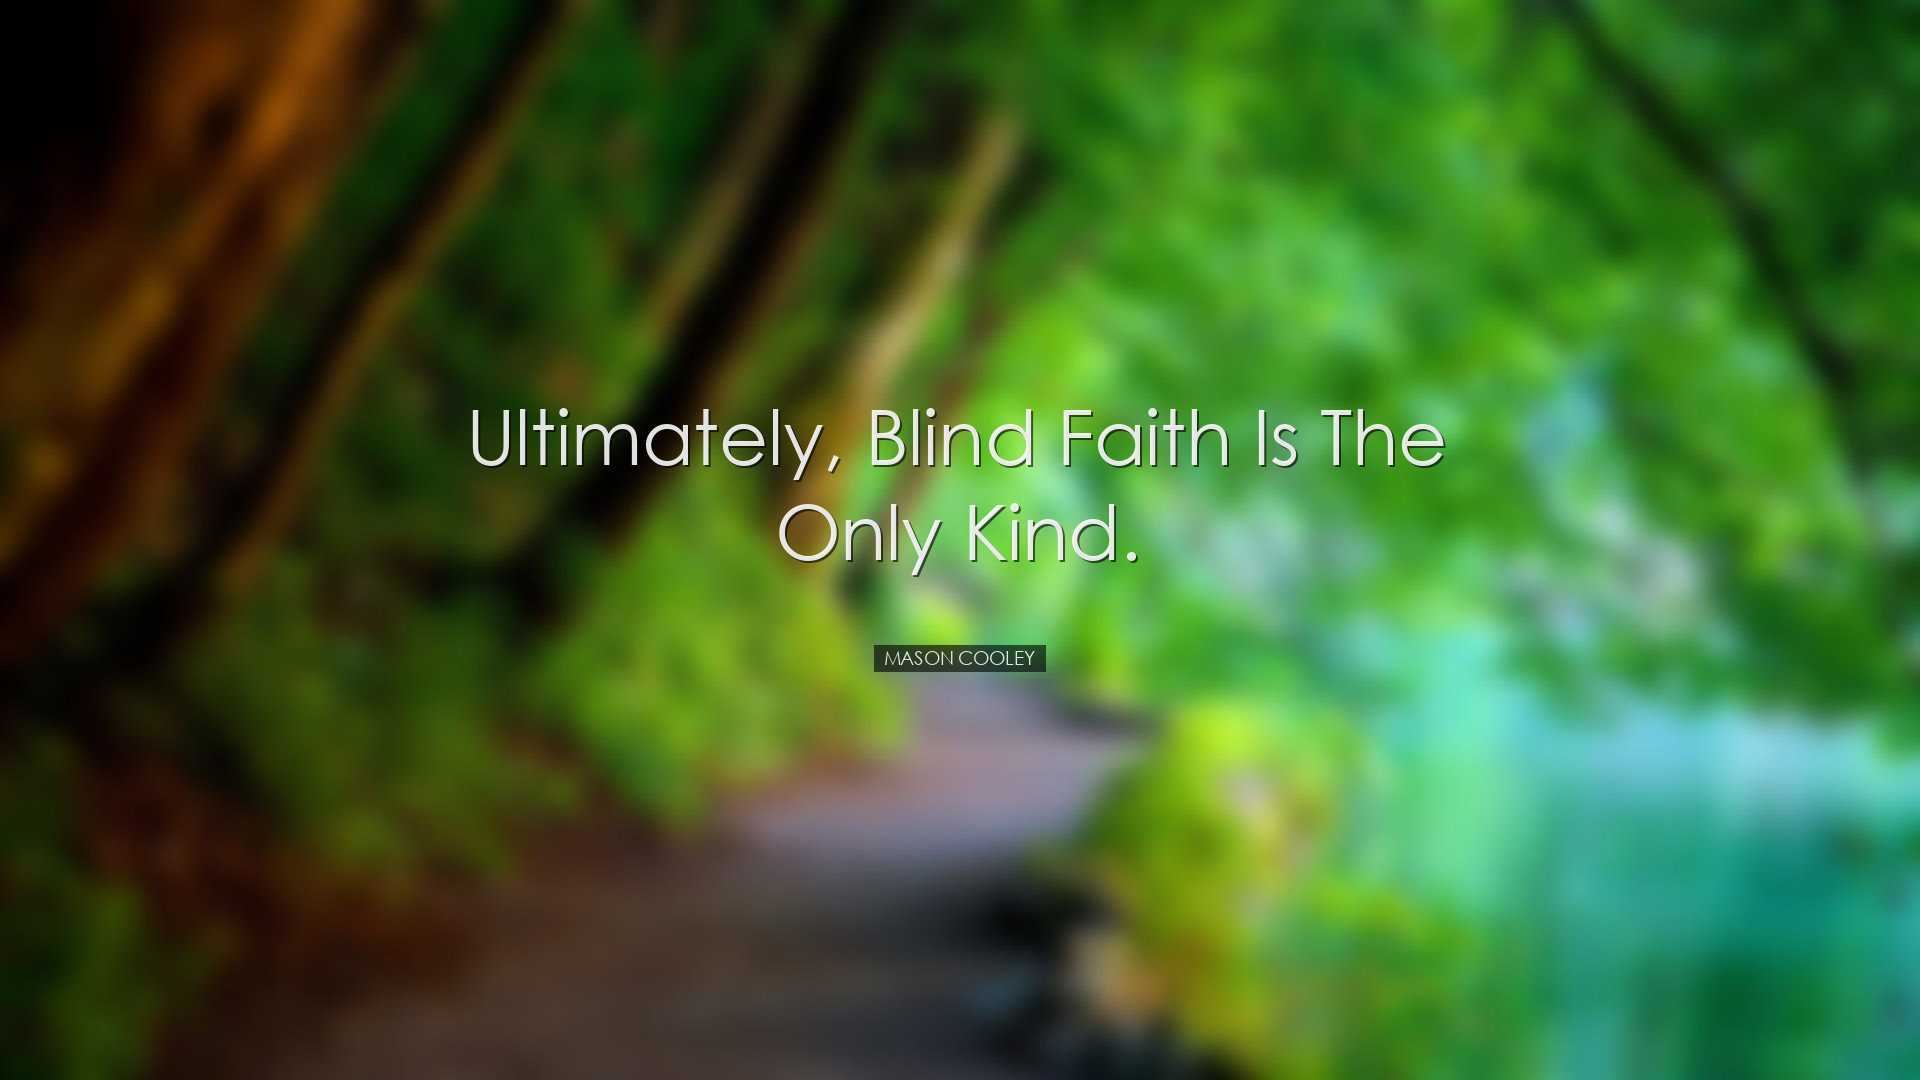 Ultimately, blind faith is the only kind. - Mason Cooley